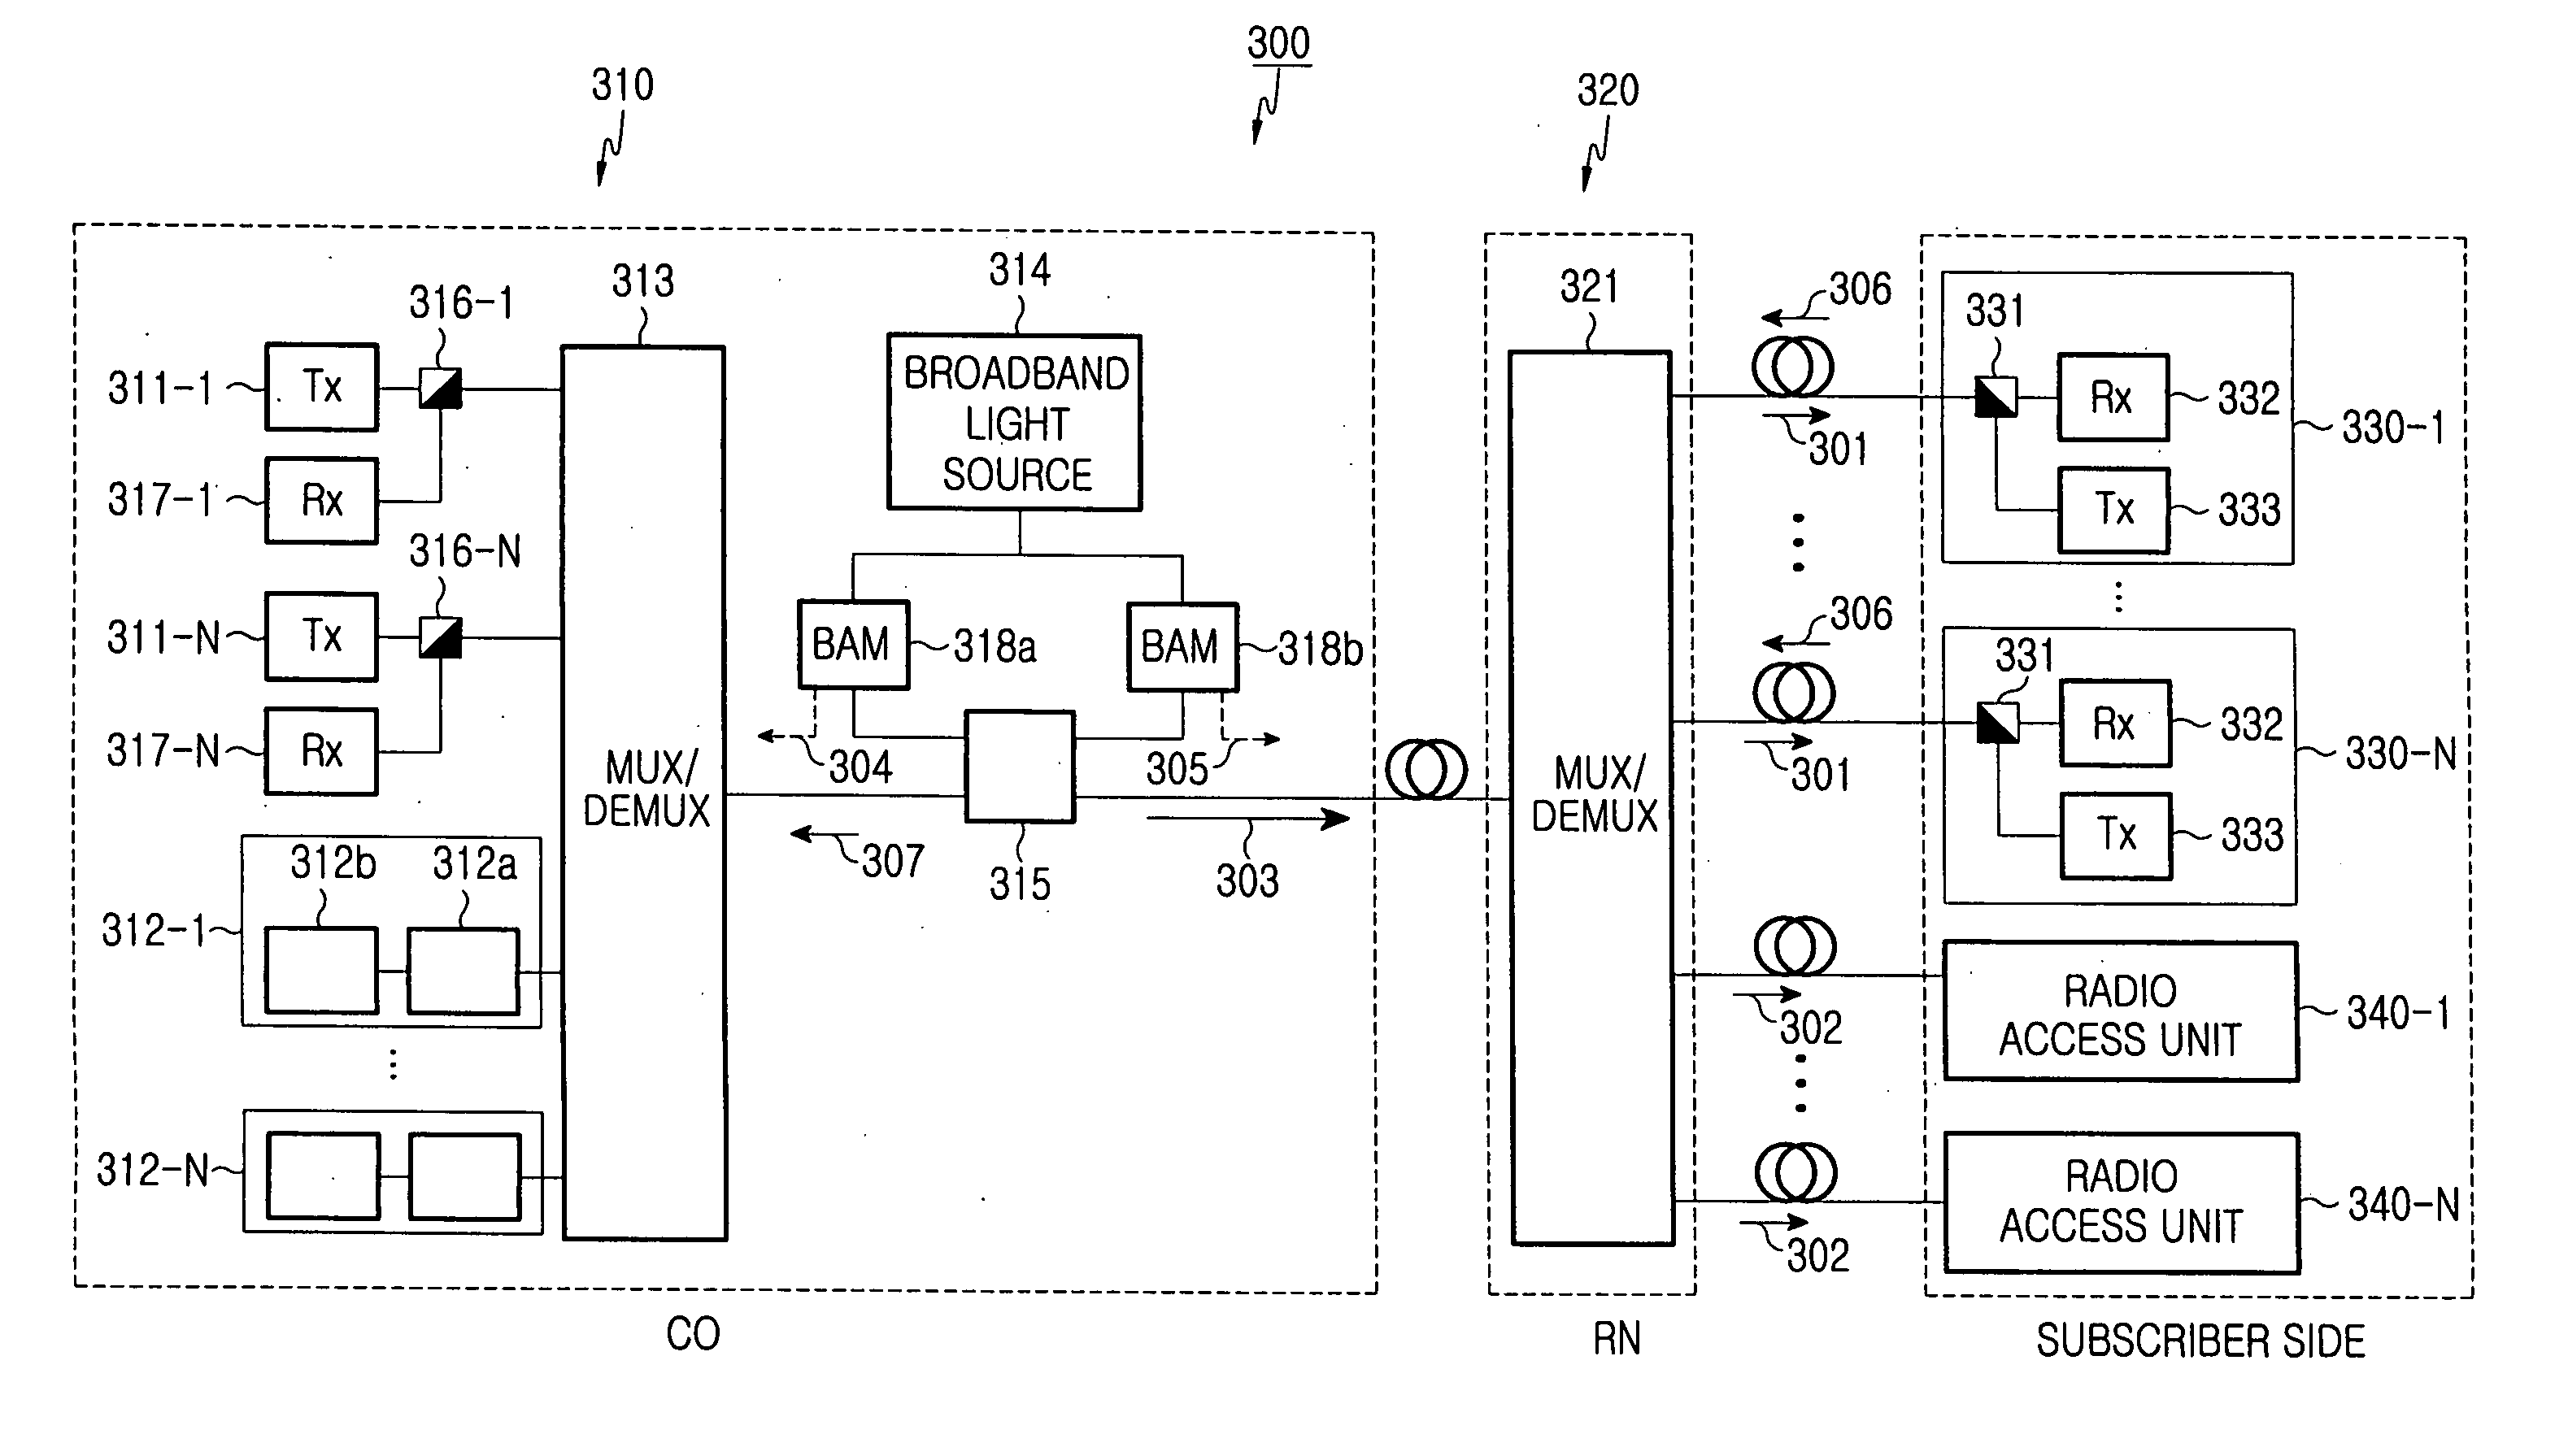 Optical access network of wavelength division method and passive optical network using the same